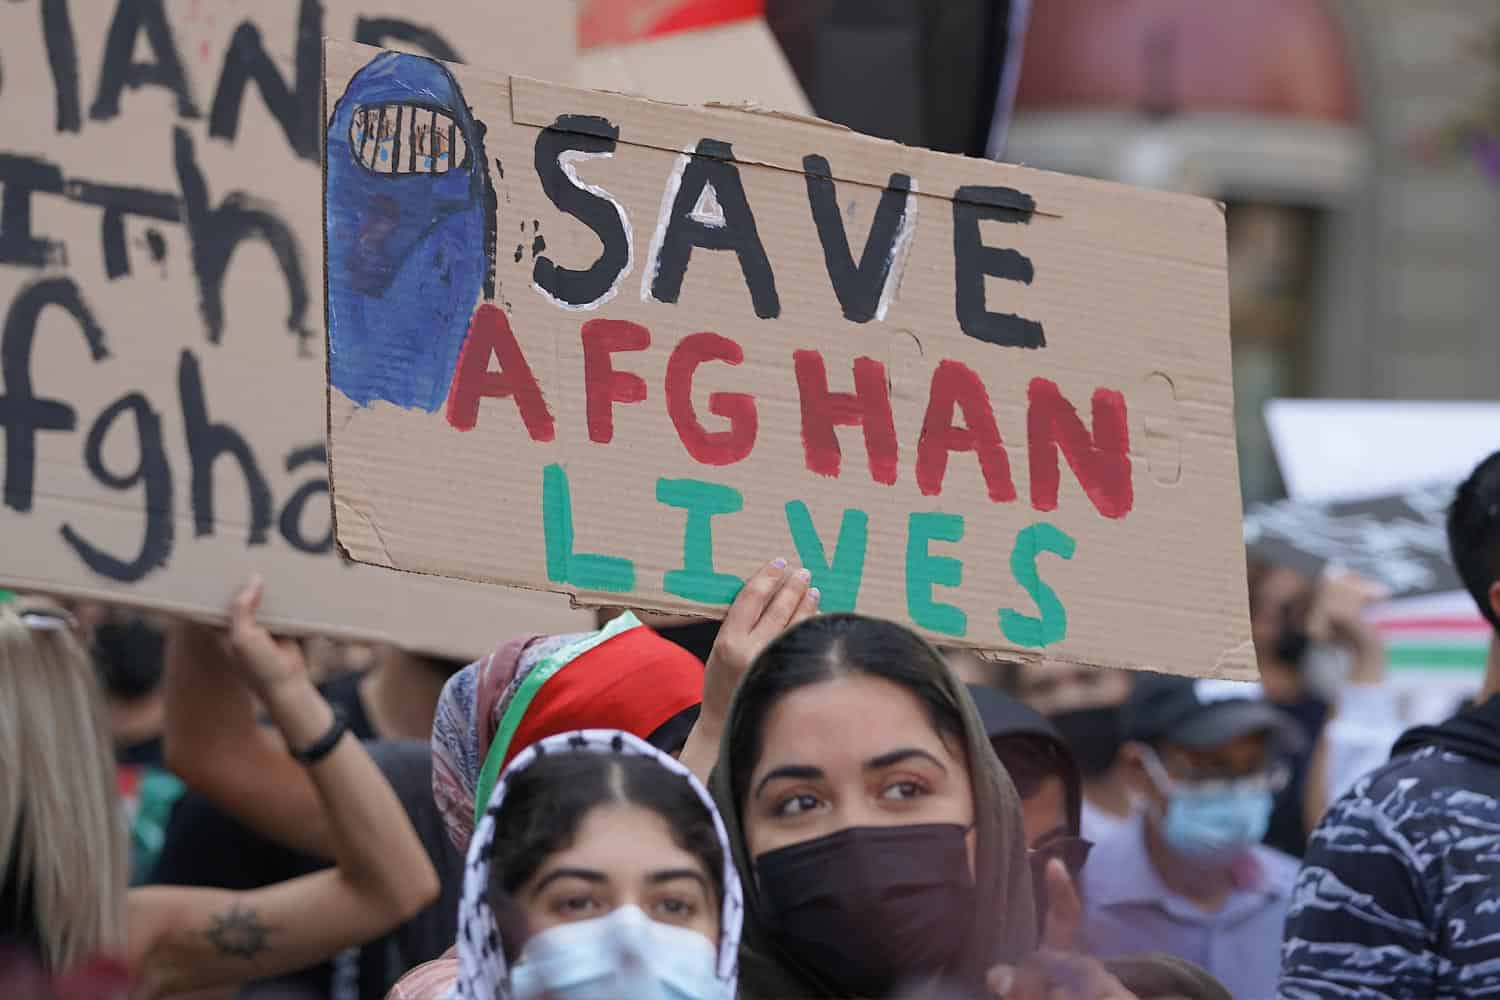 A cardboard sign being held up at a protest saying Save Afghan Lives